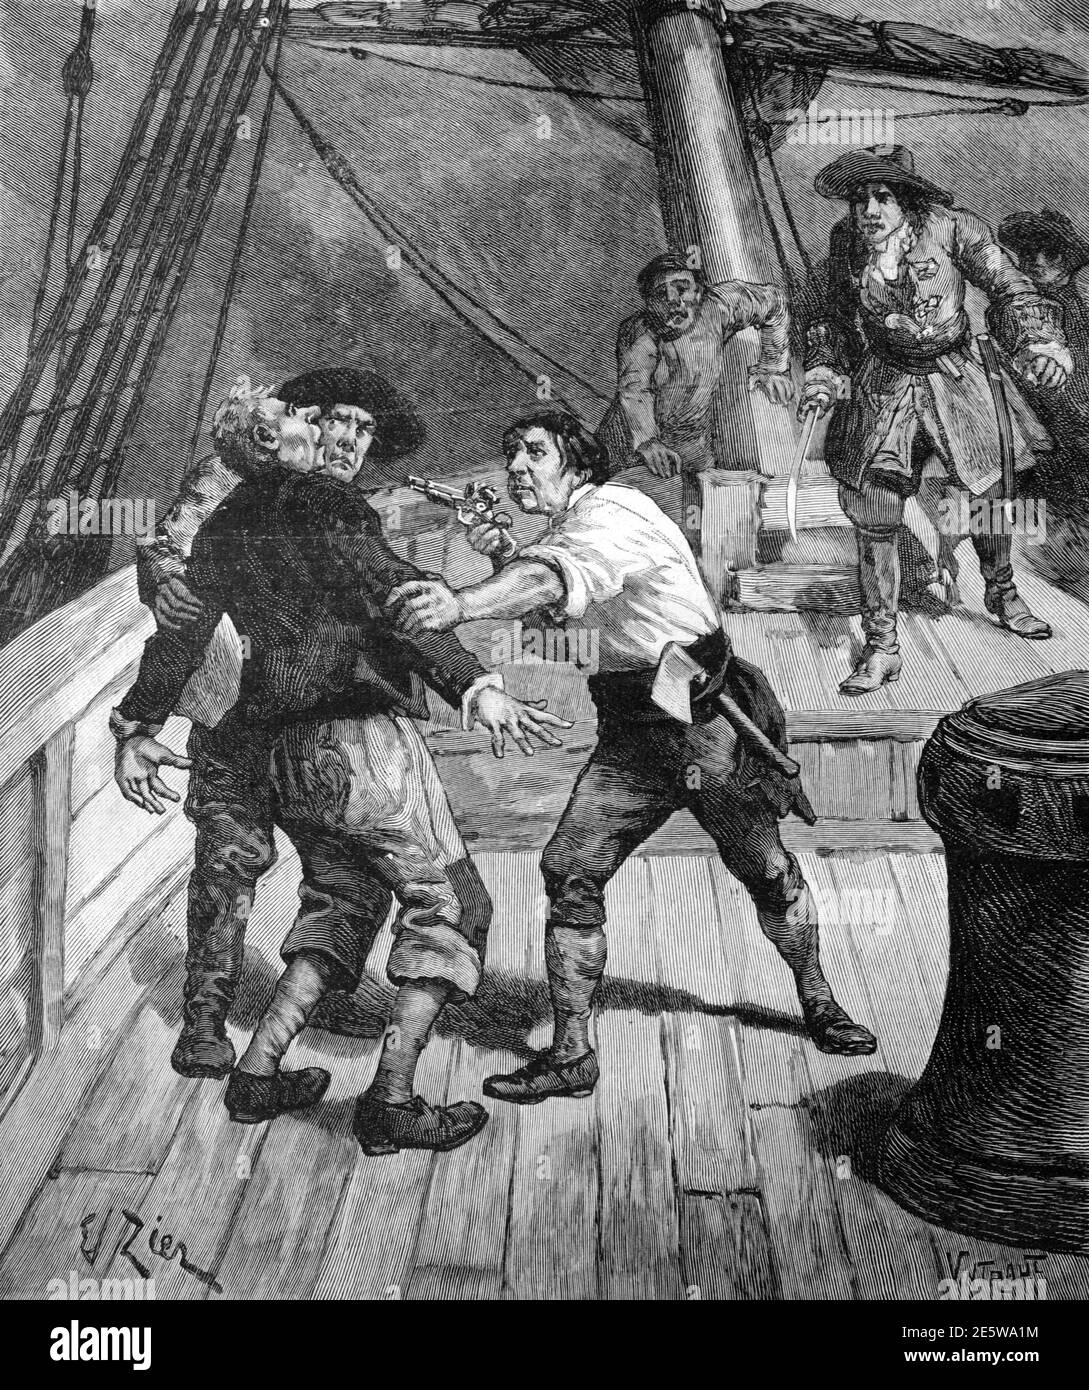 French Corsair Jean François Doublet (1655-1728) on Deck of Tall Ship 1903 Vintage Illustration or Engraving Stock Photo